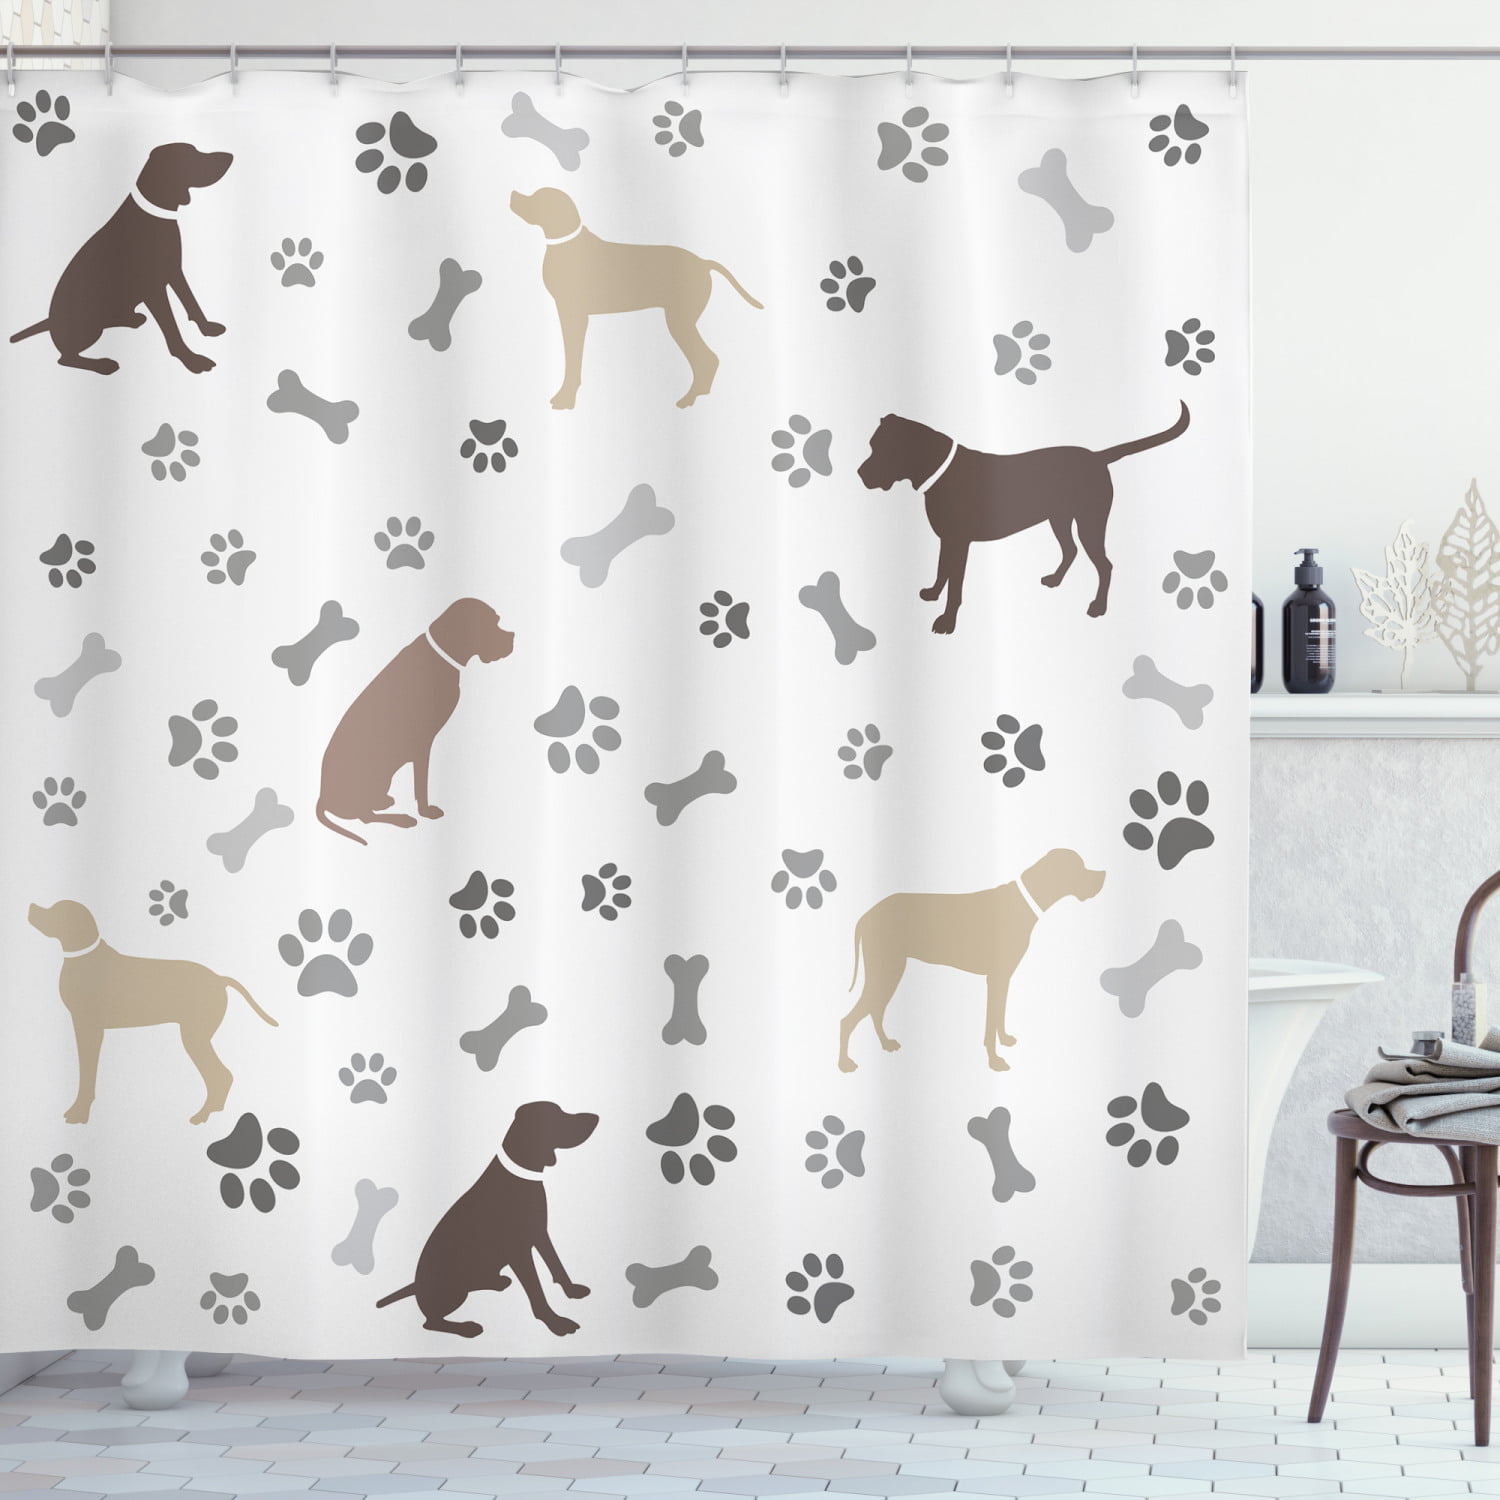 Charcoal Grey 70 Inches Black Silhouettes of Pets in Various Positions Friendly Playful Dog Breed Cloth Fabric Bathroom Decor Set with Hooks Ambesonne Labrador Shower Curtain